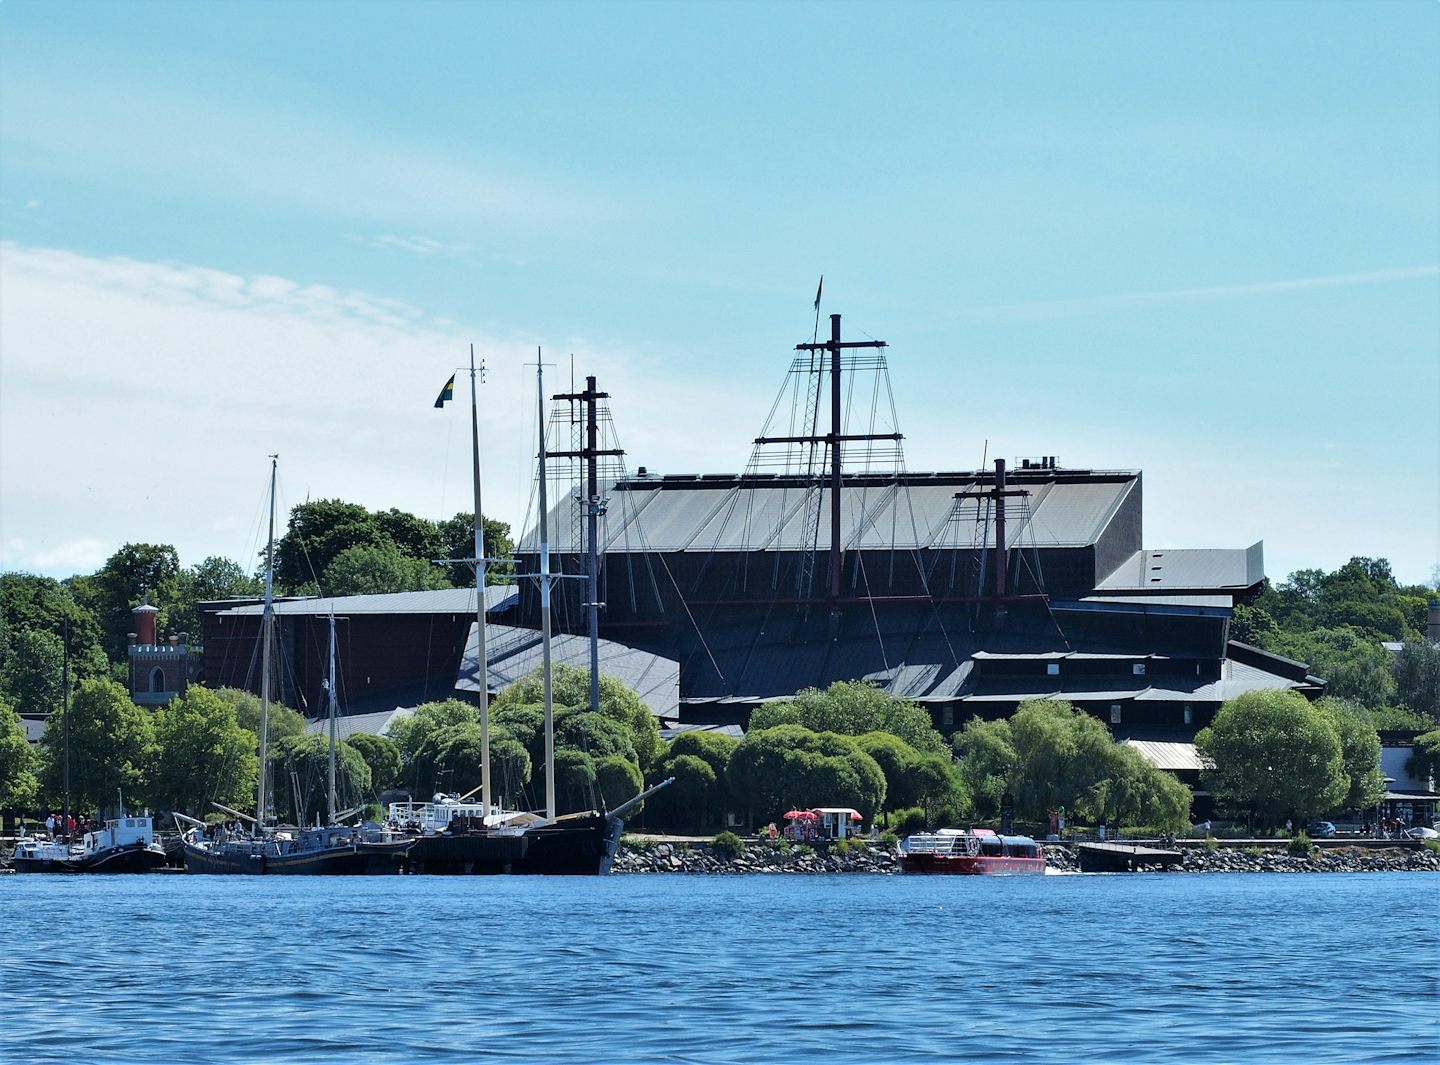 The Vasa museum from the water